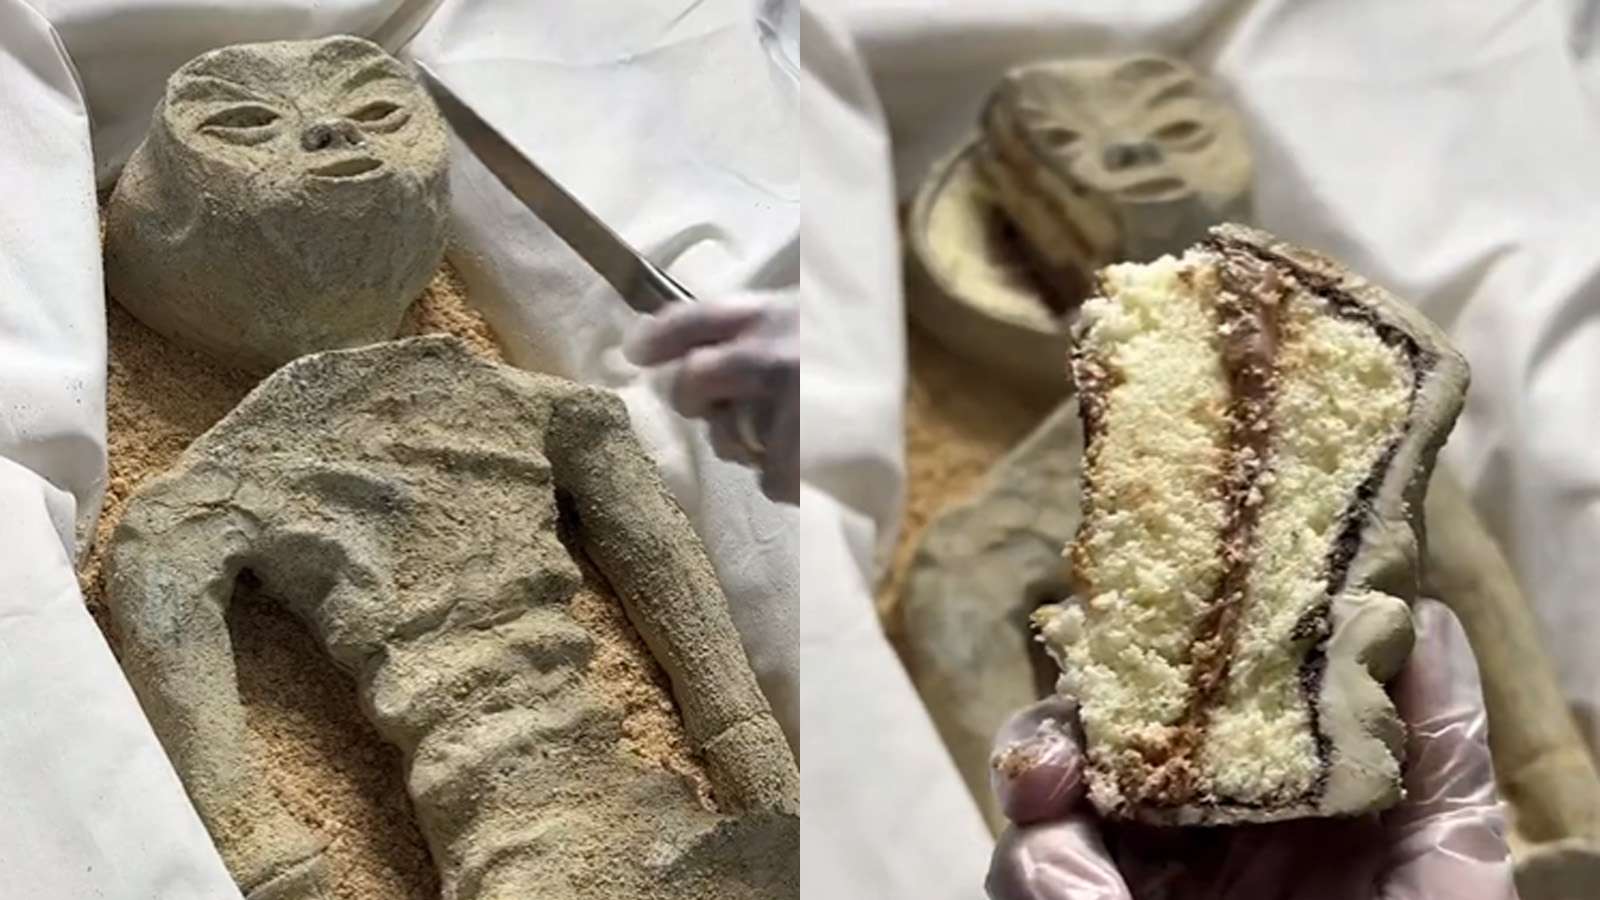 Viral alien corpse shown to Mexican government inspires cake remake